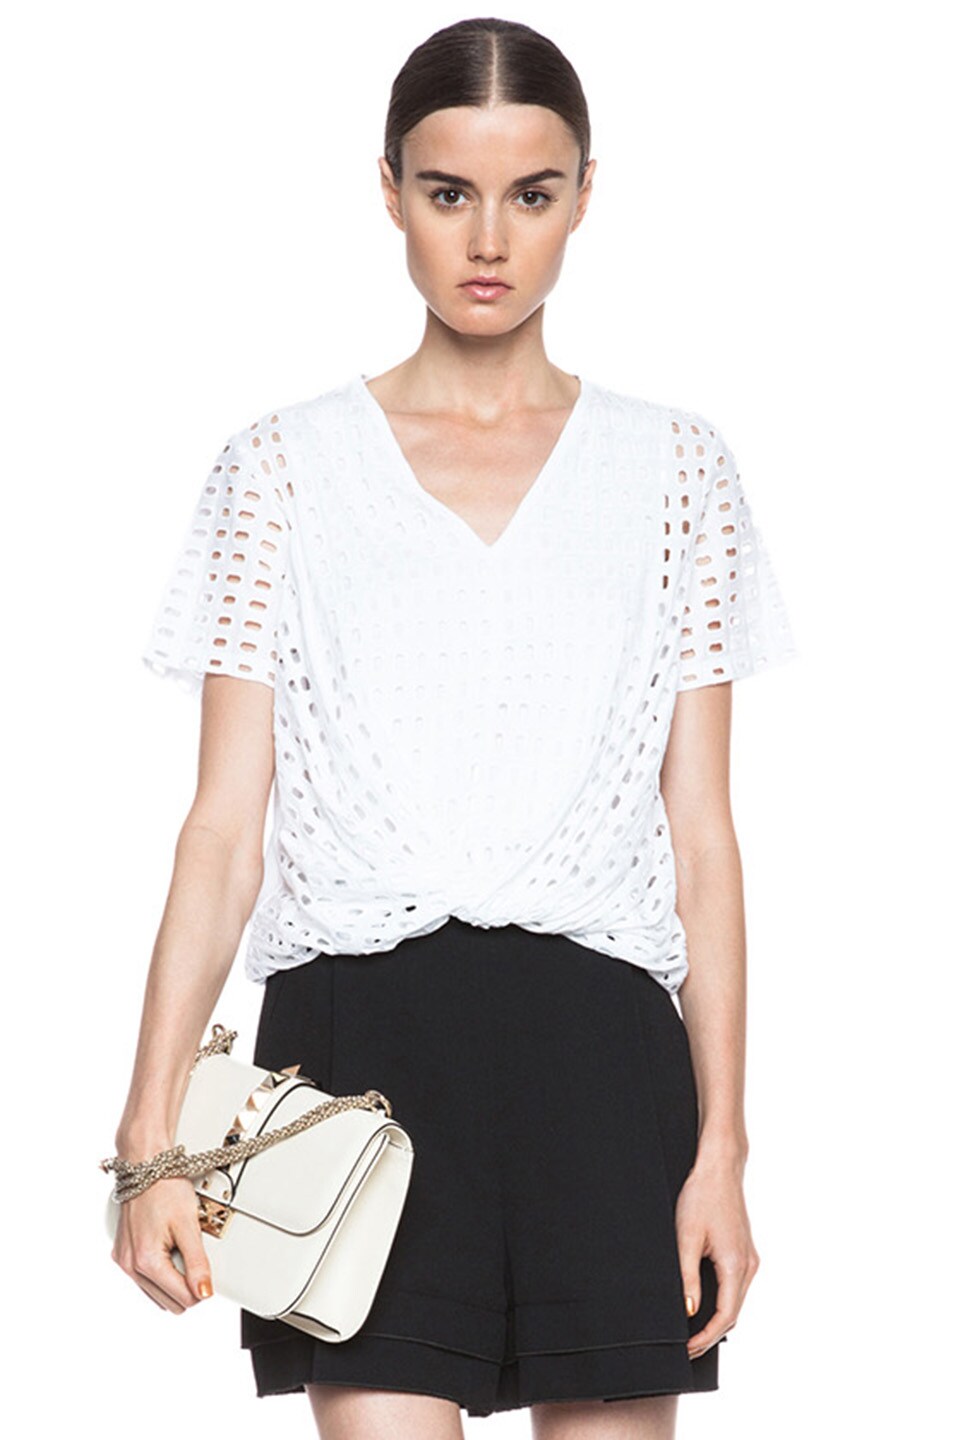 Carven Hemstitched Cotton Top in White | FWRD